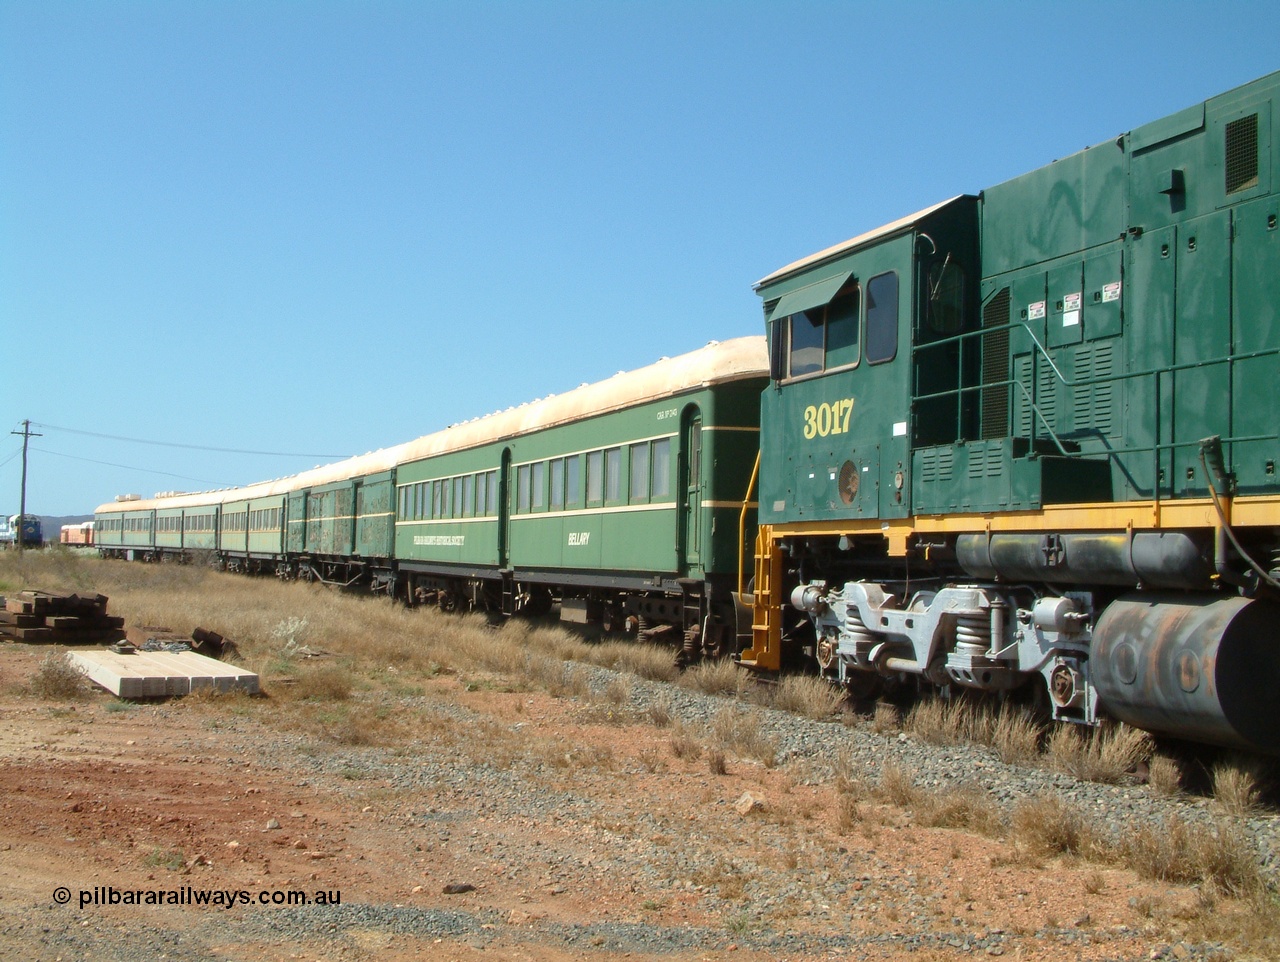 041014 142329
Pilbara Railways Historical Society, view along the passenger carriages behind rebuilt ALCo C636R locomotive 3017 with the first passenger carriage 'Bellany' was originally built by Clyde Engineering at Granville NSW in 1936 for the NSWGR as a second class railway carriage FS type FS 2143. In 1987 it was purchased by the Society and is named after a local river. The next carriage is van 'Portland' and originally an NSWGR MHO type guards van MHO 2321, then recoded to KB type mail van, then to KBY 2513 guards van. 14th October 2004.
Keywords: 3017;Comeng-WA;ALCo;C636R;WA-135-C-6043-04;rebuild;